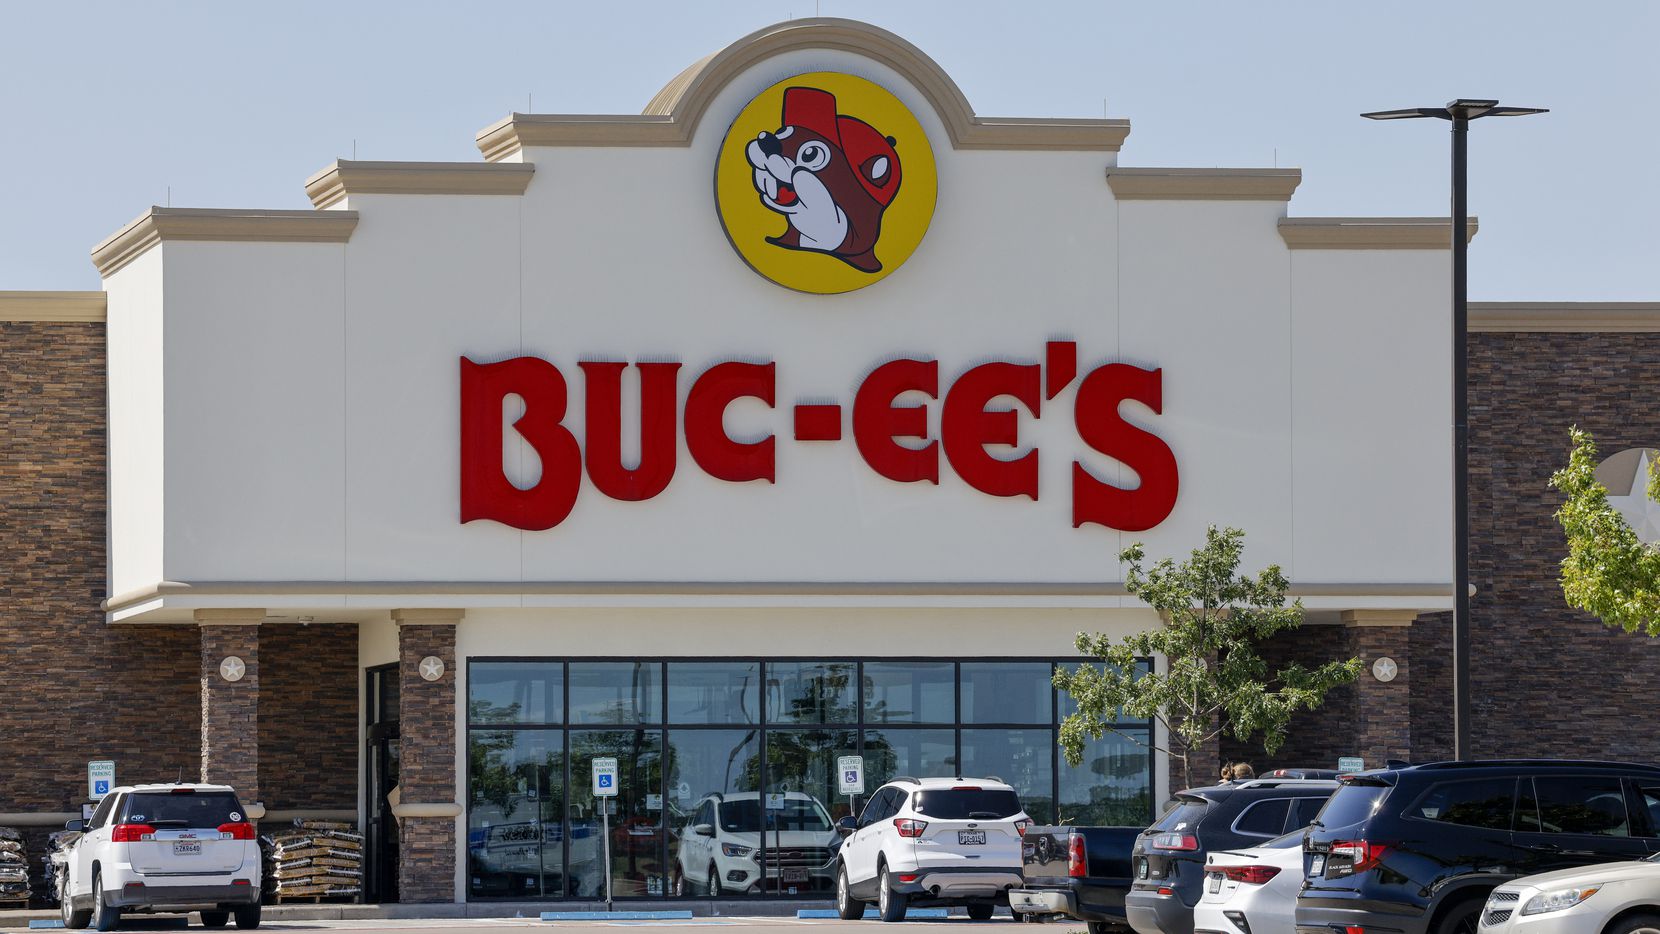 Buc-ee's in Terrell is one of six that the chain operates in North Texas.